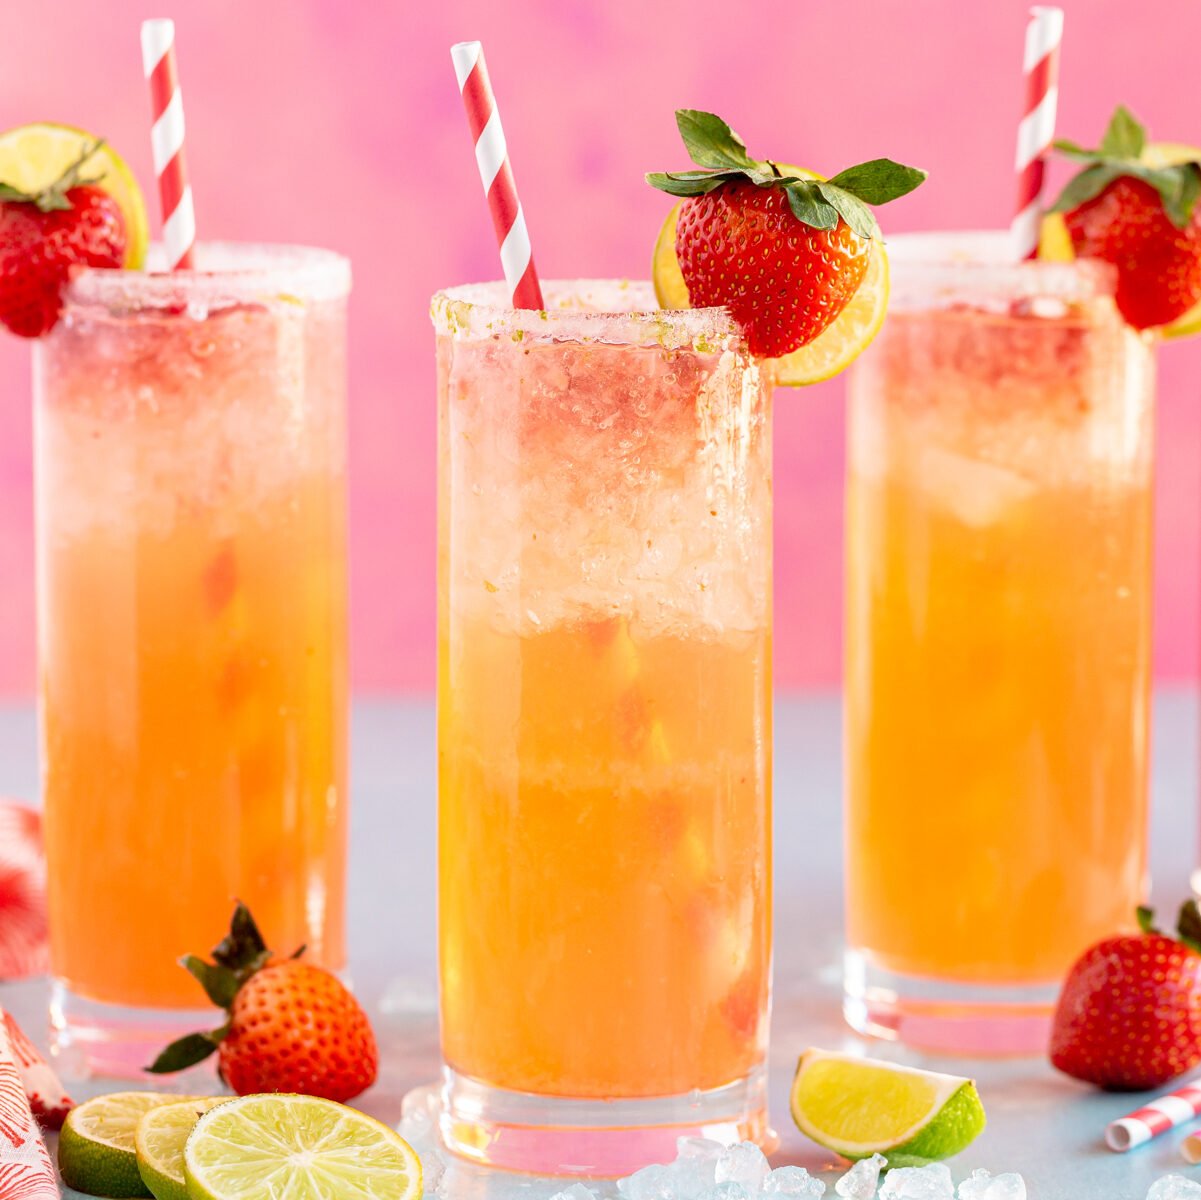 The Perfect Summer Drink - Citrus Strawberry Mocktail